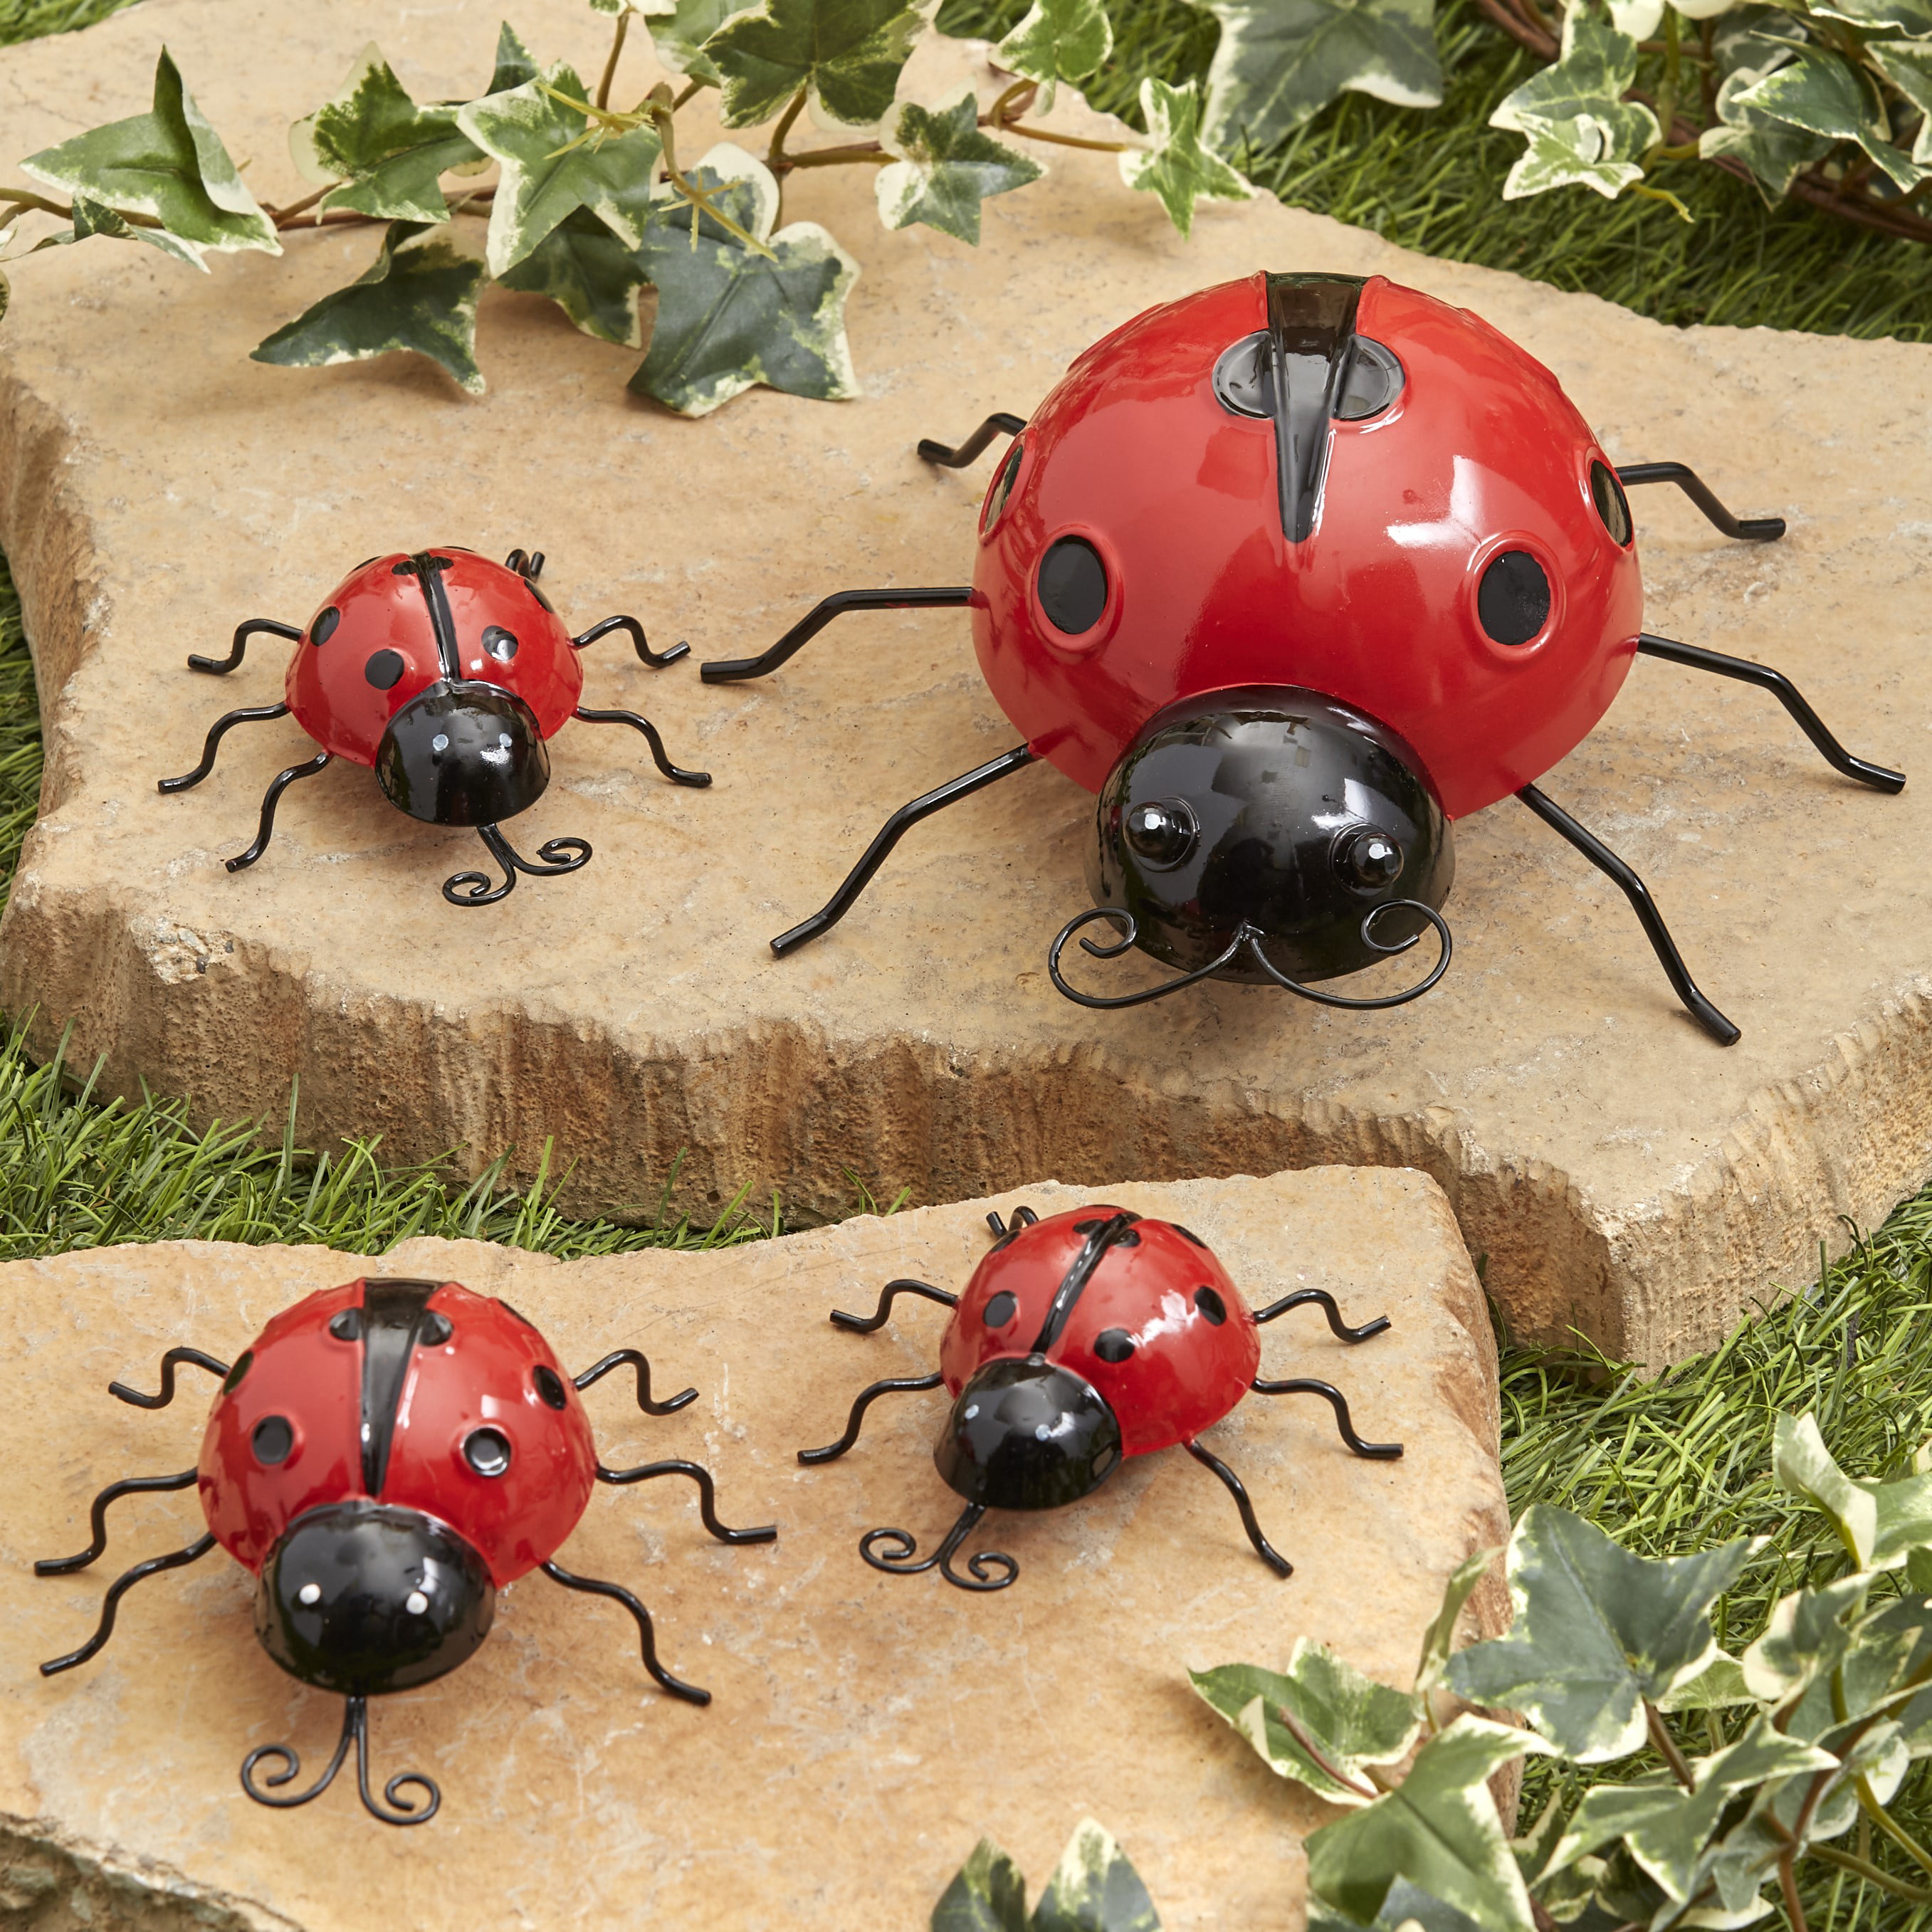 Garden Stepping Stones Ladybug Porch Patio Yard Statue Decorations Red 3 PC 